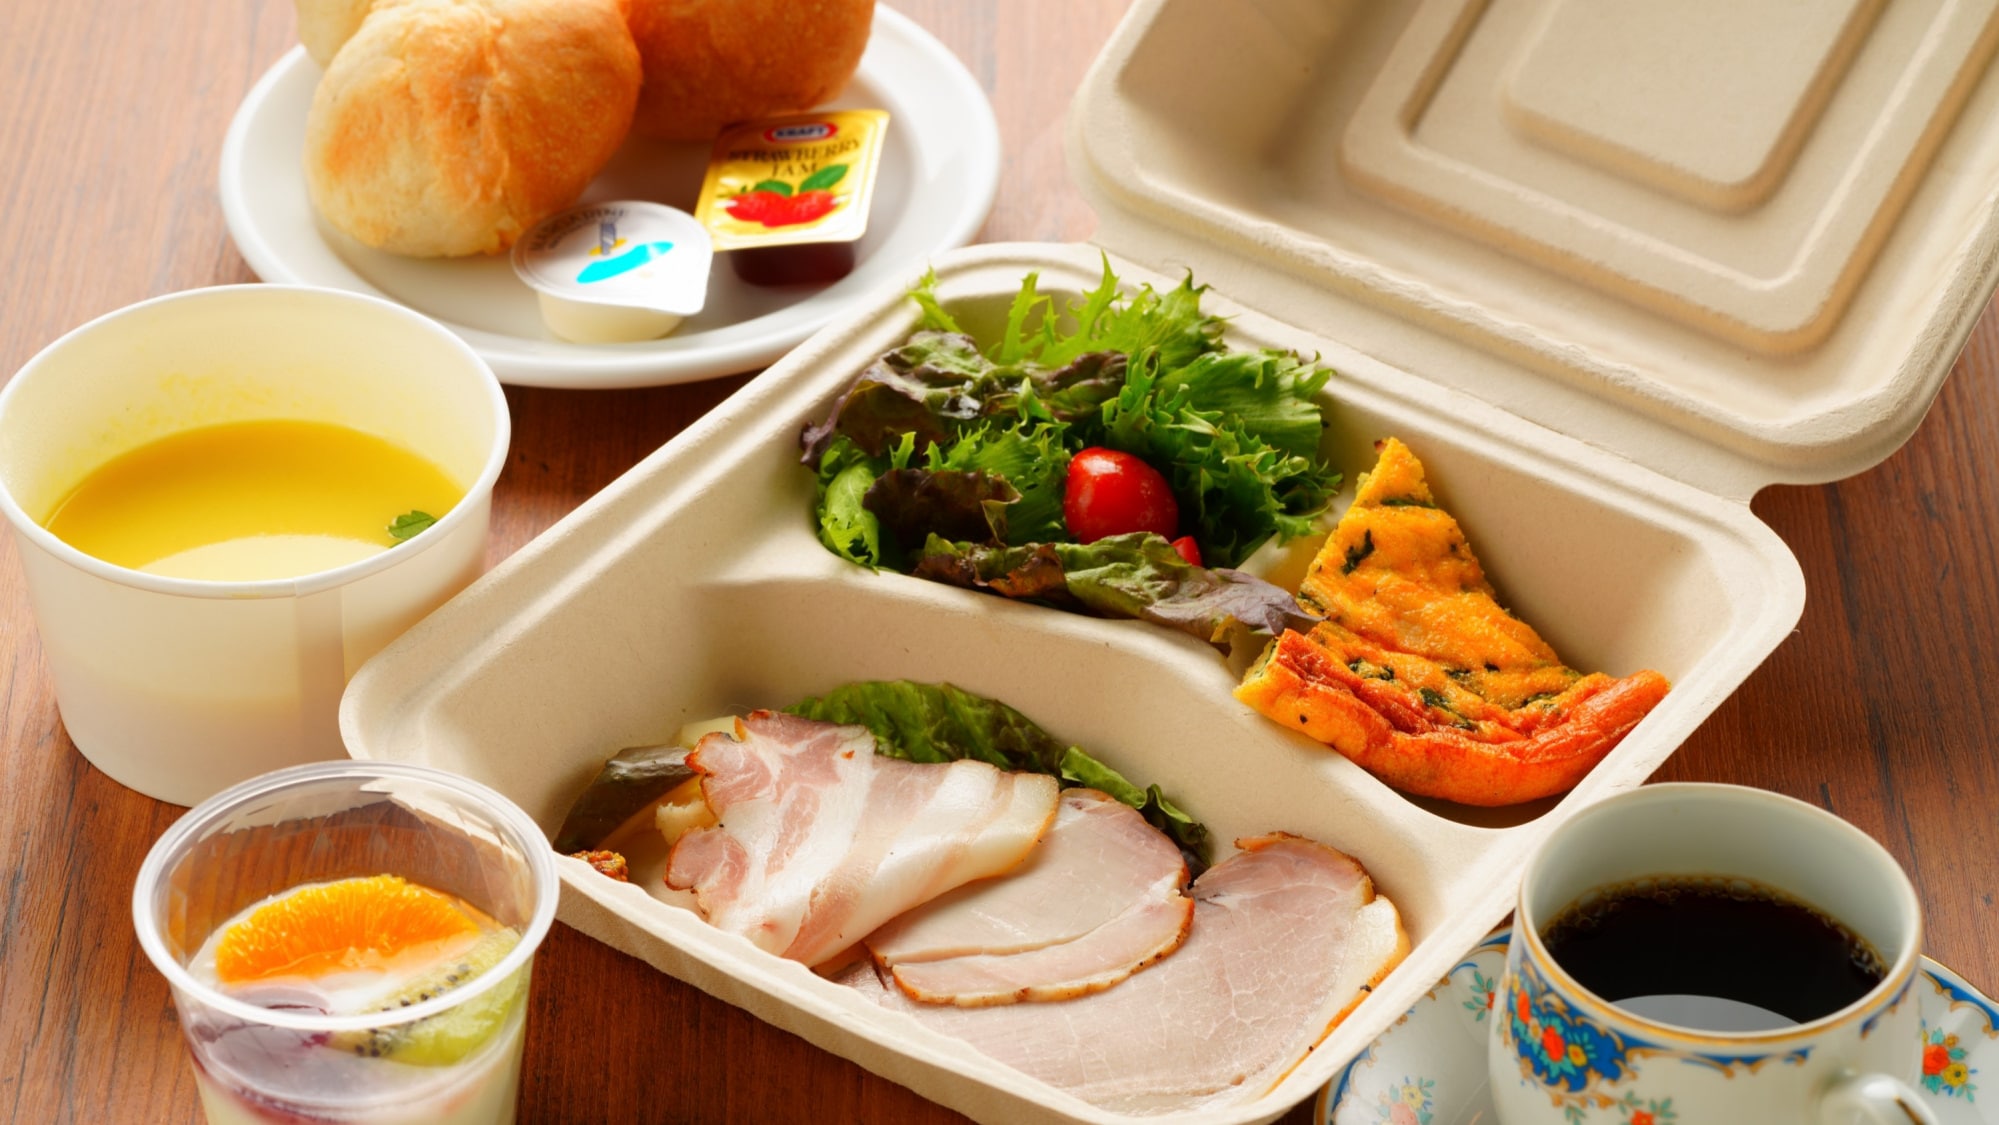 [Breakfast] A morning box featuring ham and eggs will be delivered to your room!